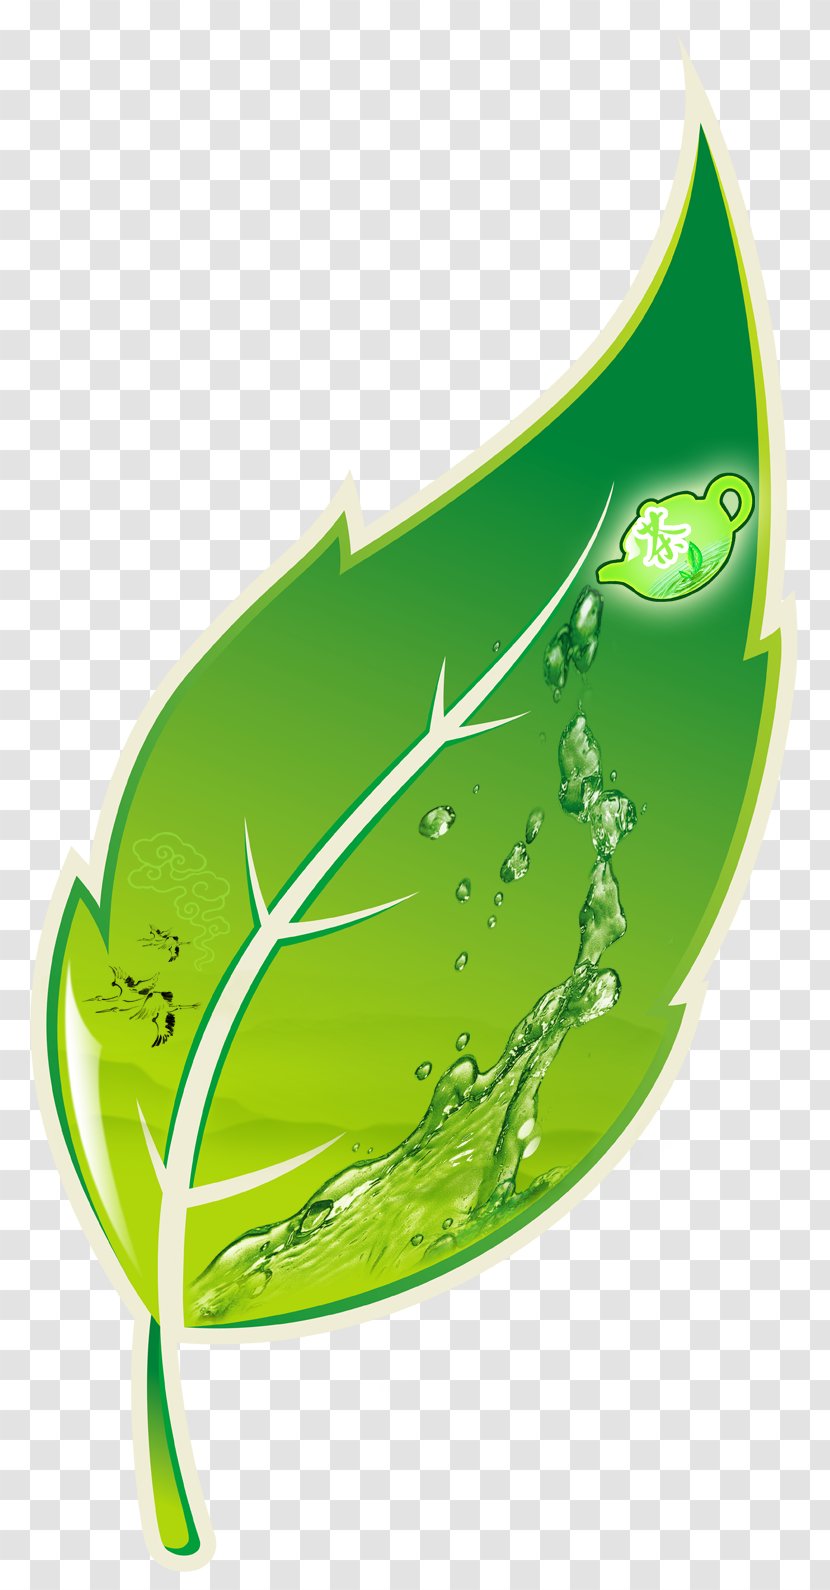 Green Tea Anxi County Graphic Design - Plant - Icon Vector Material Transparent PNG